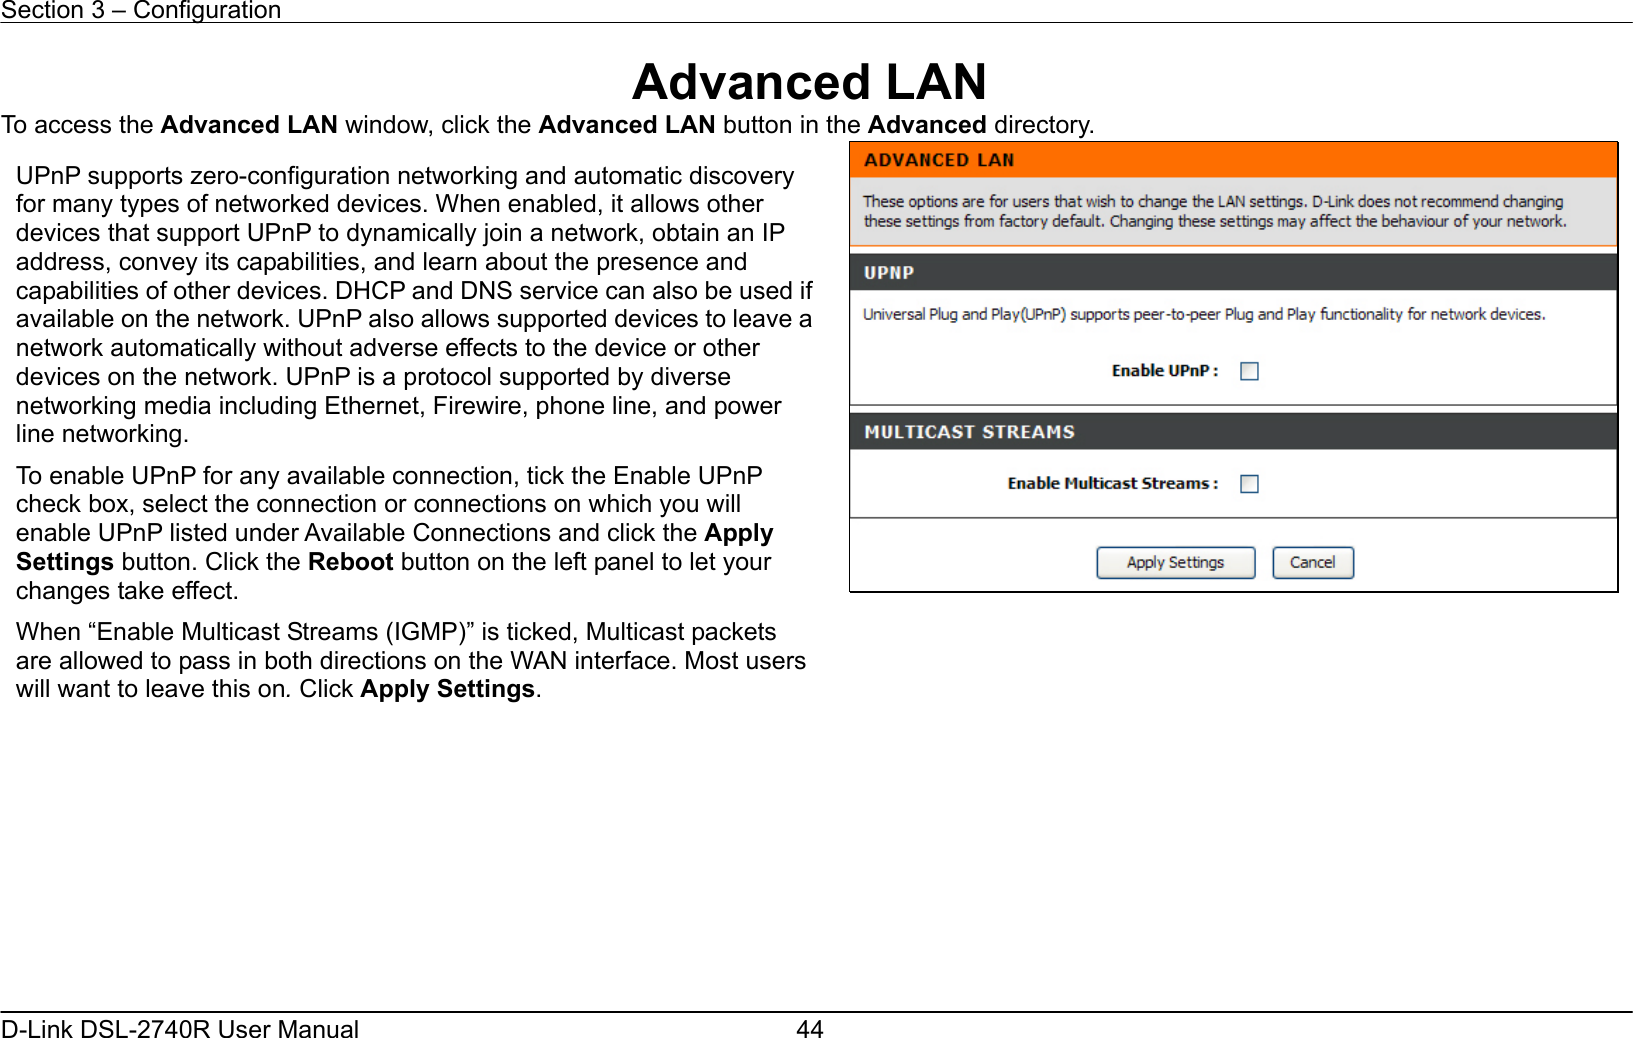 Section 3 – Configuration   D-Link DSL-2740R User Manual  44Advanced LAN To access the Advanced LAN window, click the Advanced LAN button in the Advanced directory.               UPnP supports zero-configuration networking and automatic discovery for many types of networked devices. When enabled, it allows other devices that support UPnP to dynamically join a network, obtain an IP address, convey its capabilities, and learn about the presence and capabilities of other devices. DHCP and DNS service can also be used ifavailable on the network. UPnP also allows supported devices to leave anetwork automatically without adverse effects to the device or other devices on the network. UPnP is a protocol supported by diverse networking media including Ethernet, Firewire, phone line, and power line networking. To enable UPnP for any available connection, tick the Enable UPnP check box, select the connection or connections on which you will enable UPnP listed under Available Connections and click the Apply Settings button. Click the Reboot button on the left panel to let your changes take effect. When “Enable Multicast Streams (IGMP)” is ticked, Multicast packets are allowed to pass in both directions on the WAN interface. Most users will want to leave this on. Click Apply Settings.   